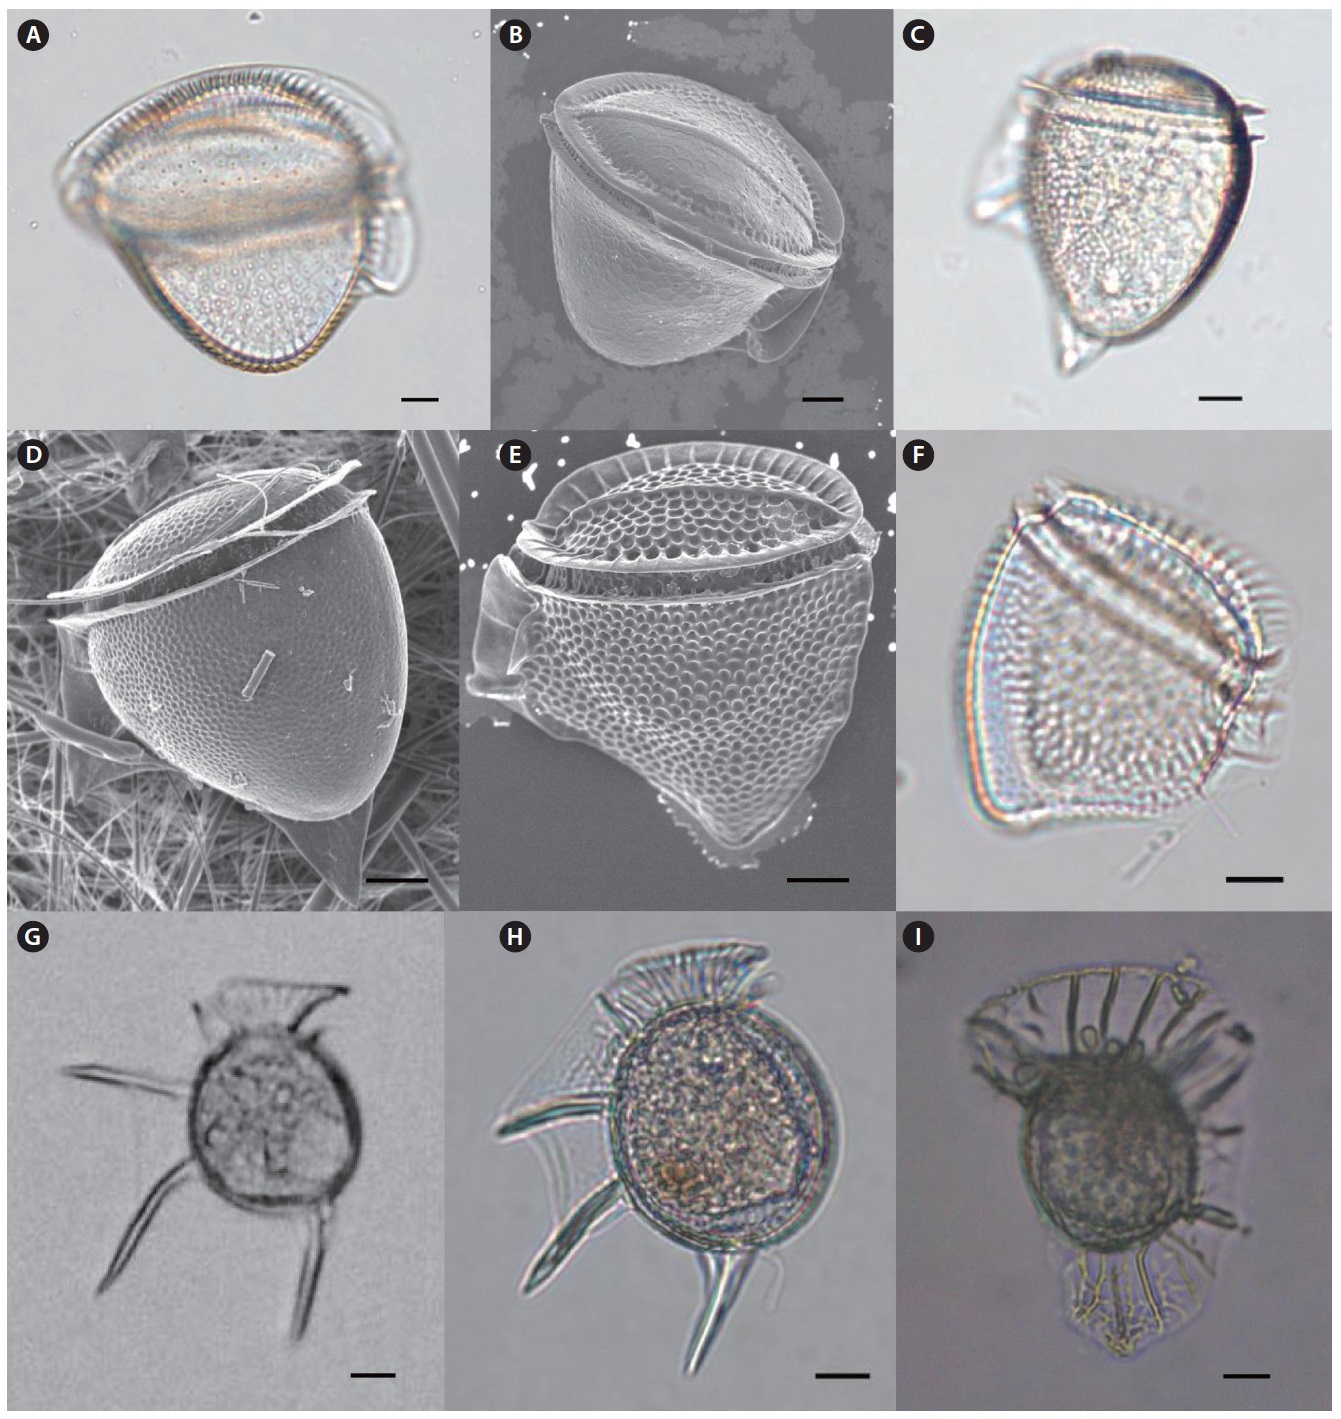 Light microscopy (LM) and scanning electron microscopy (SEM). (A) Dinophysis cuneus (LM), lateral view, (B) D. cuneus (SEM), (C) Dinophysis hastata
(LM), (D) D. hastata (SEM), (E) Dinophysis mitra (SEM), (F) D. mitra (LM), (G-H) Dinophysis schuettii (LM), (I) Ornithocercus heteroporus (LM). Scale bars, 10 μm.